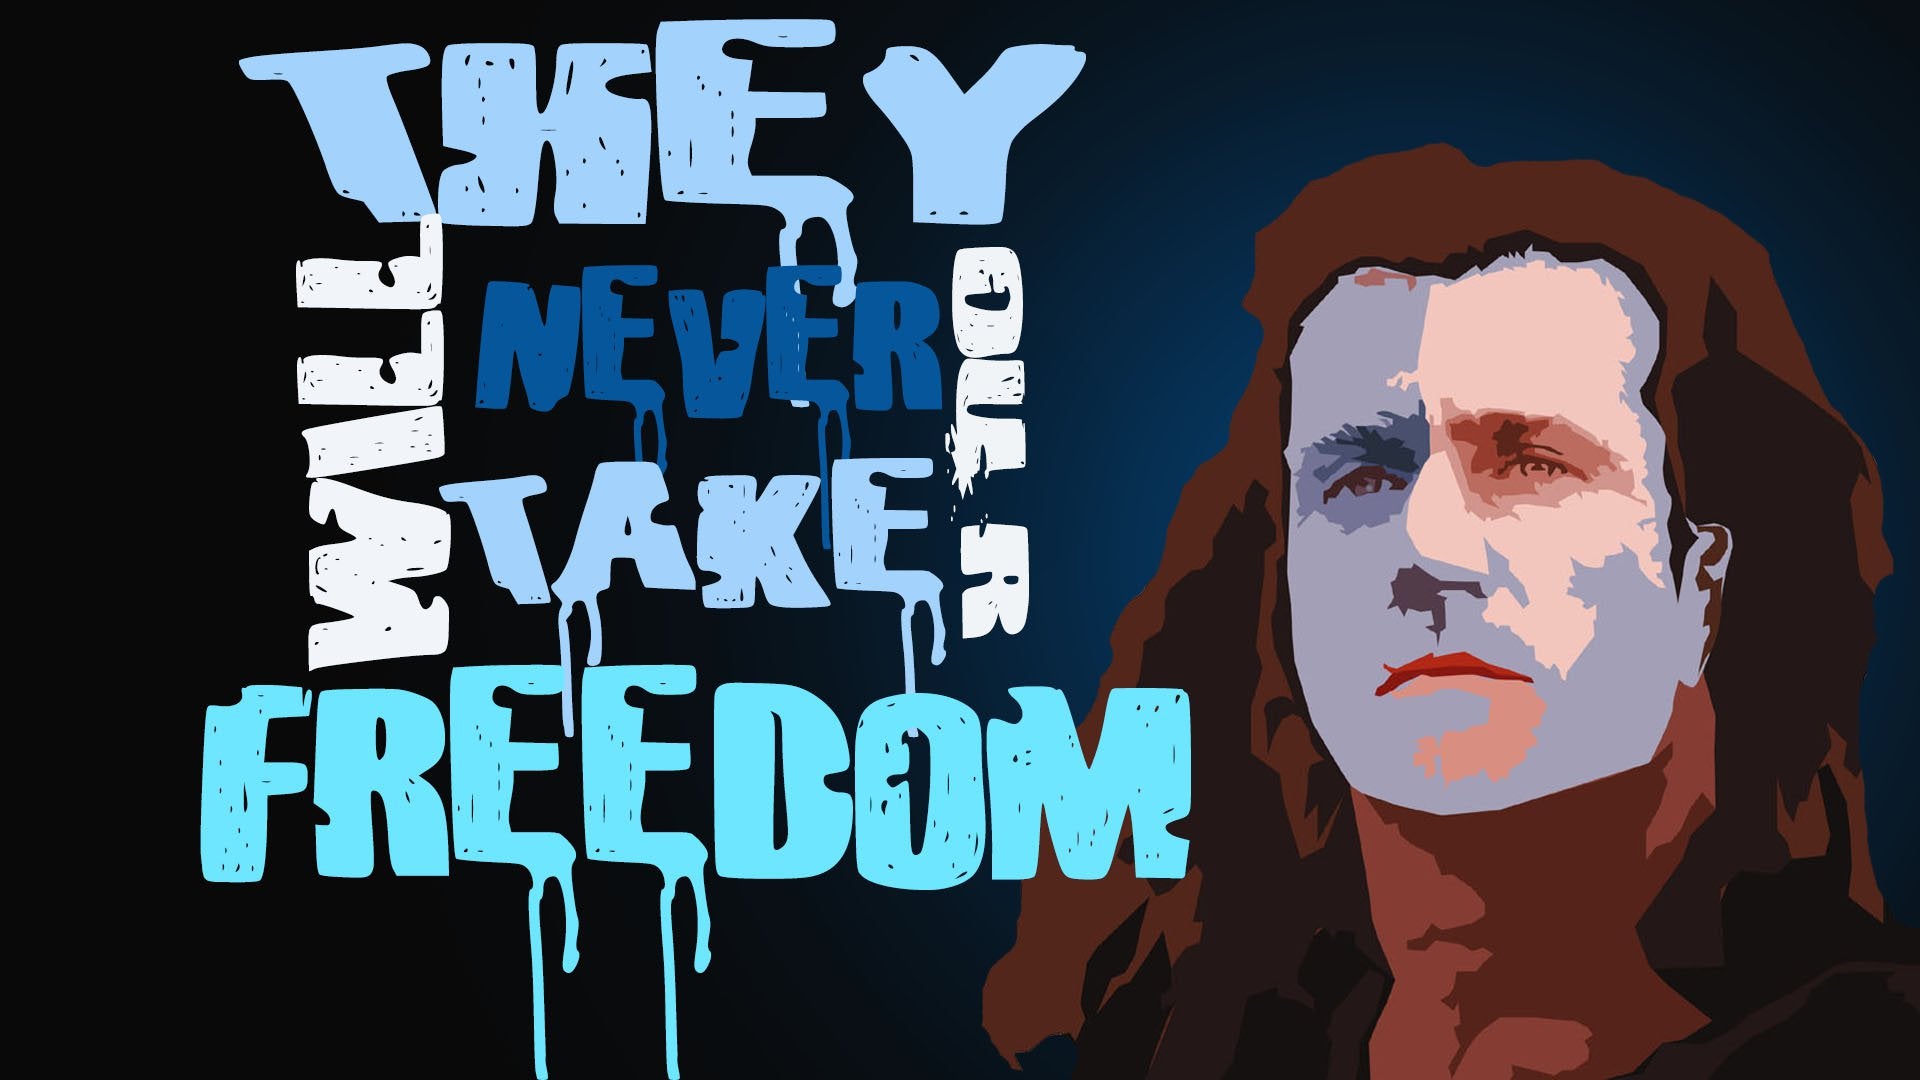 William Wallace Wallpaper of Freedom!